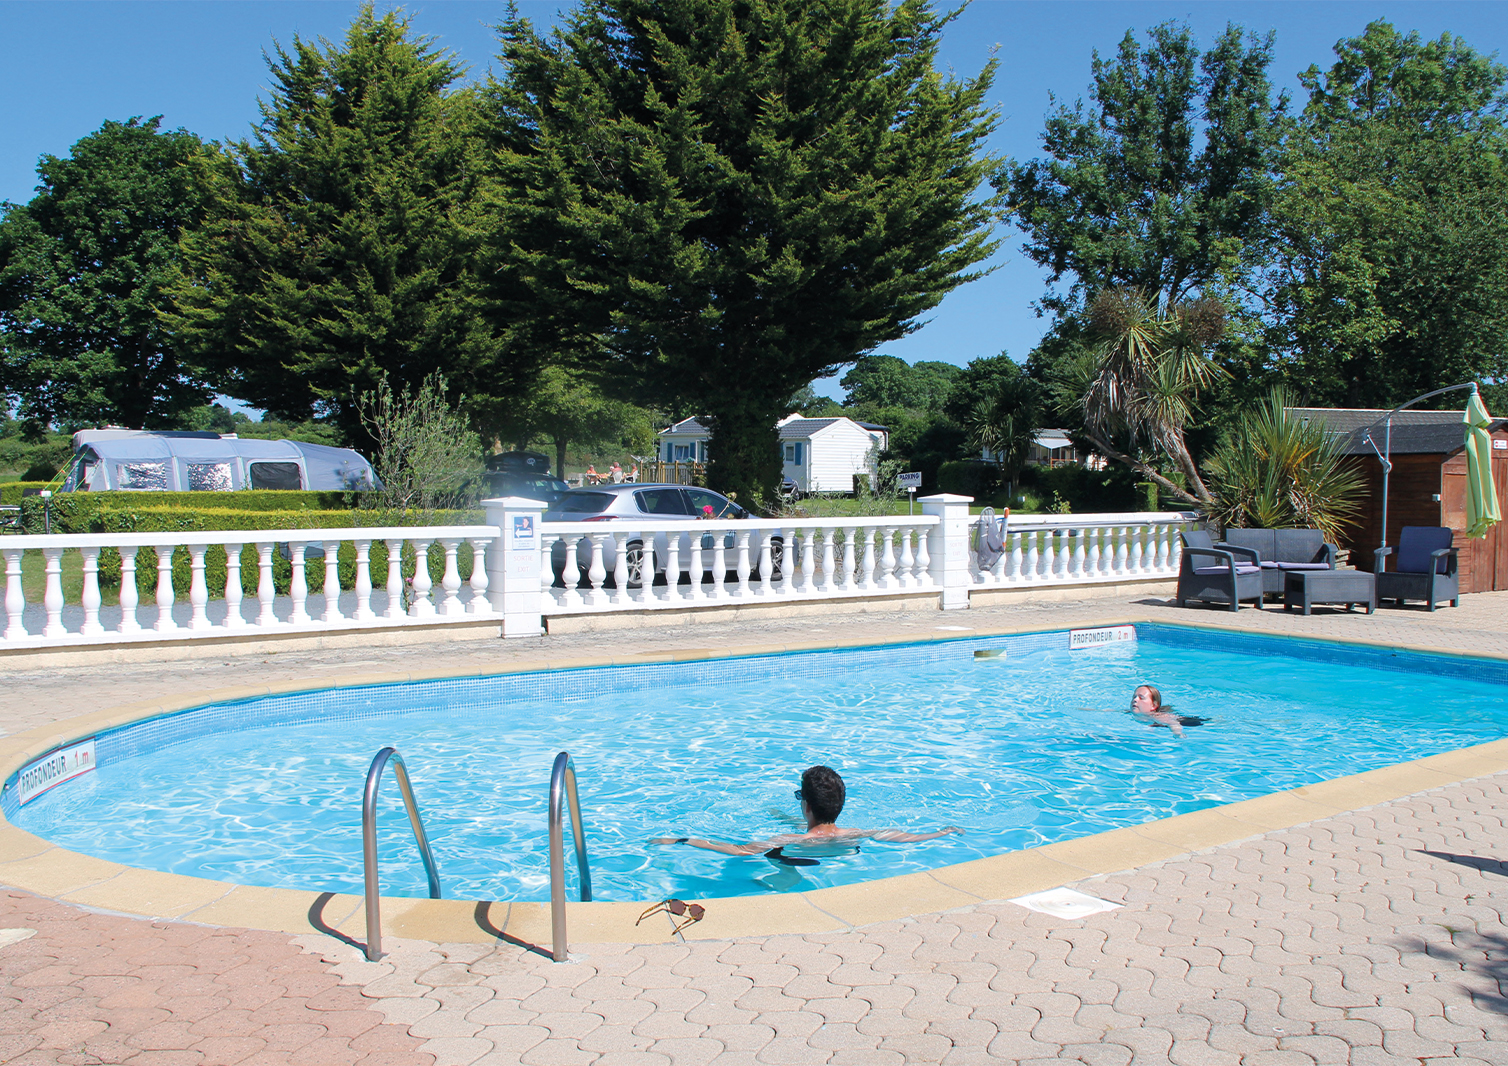   Piscine - Camping Le Picard 